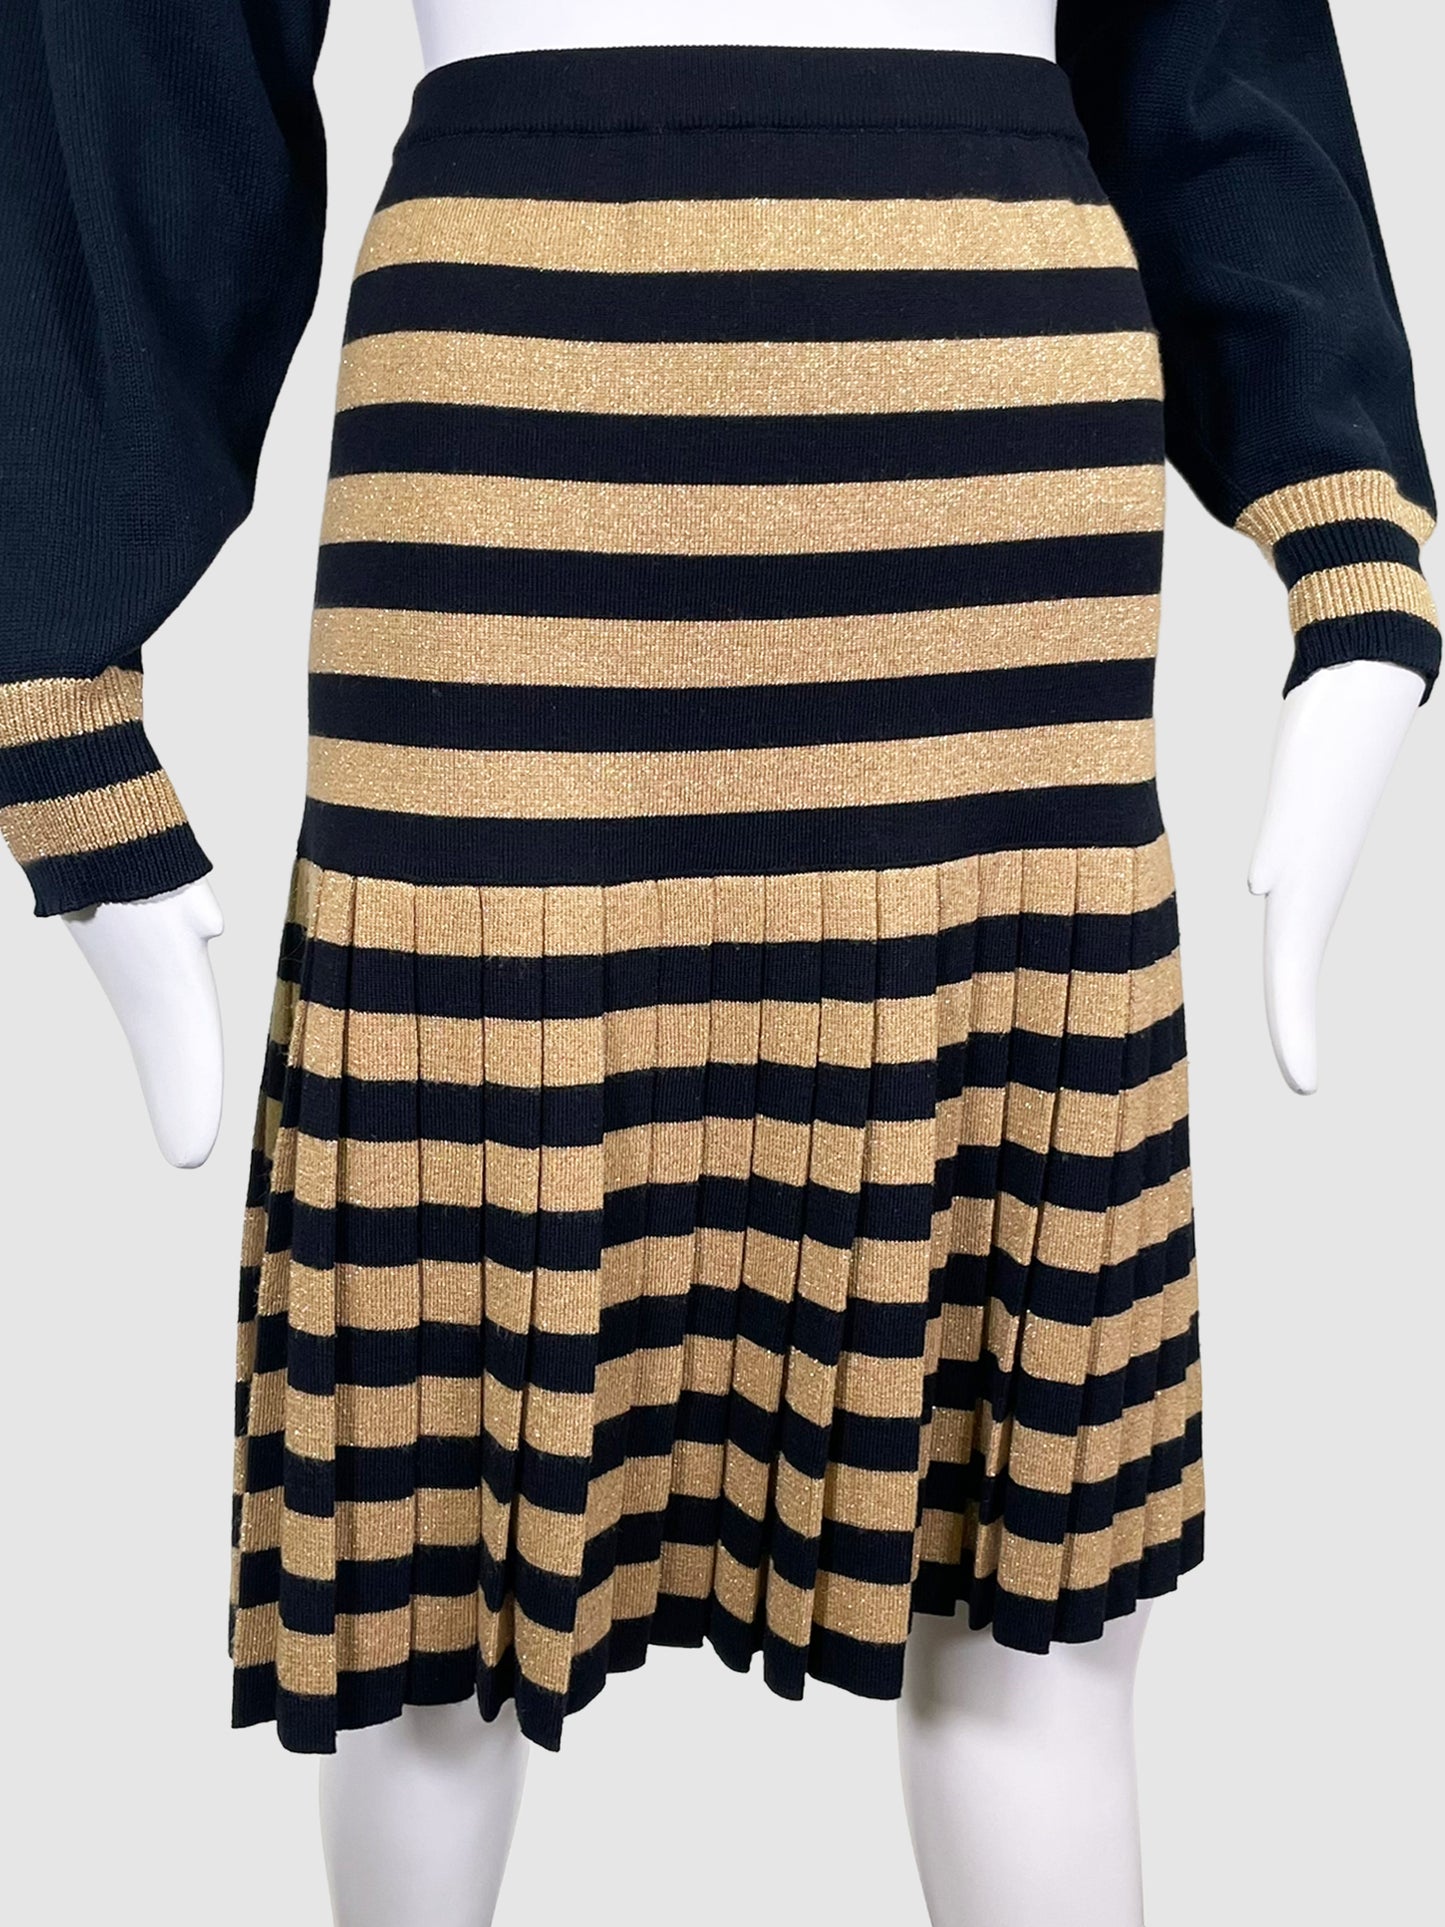 Escada Gold and Black Sweater and Skirt 2-Piece Set - Size 40